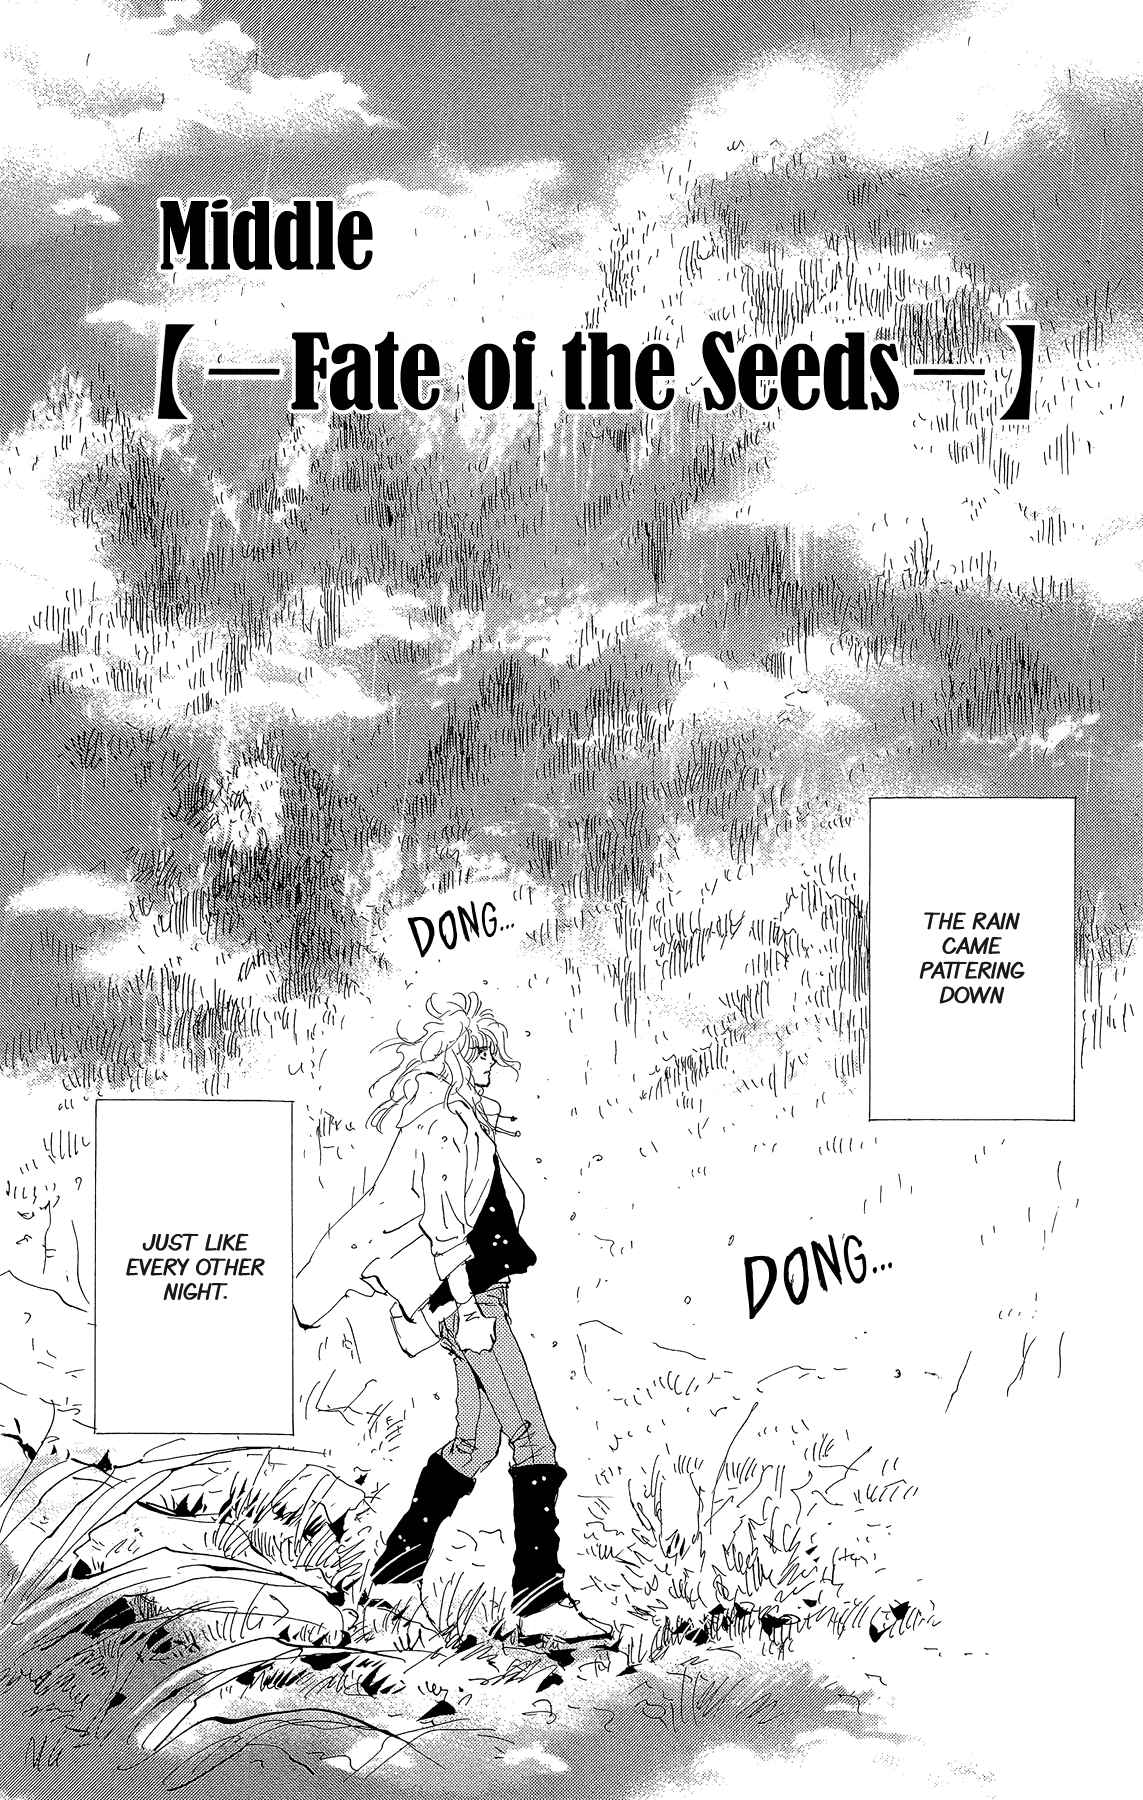 7 Seeds Gaiden Vol. 1 Ch. 2 Middle [Fate of the Seeds]